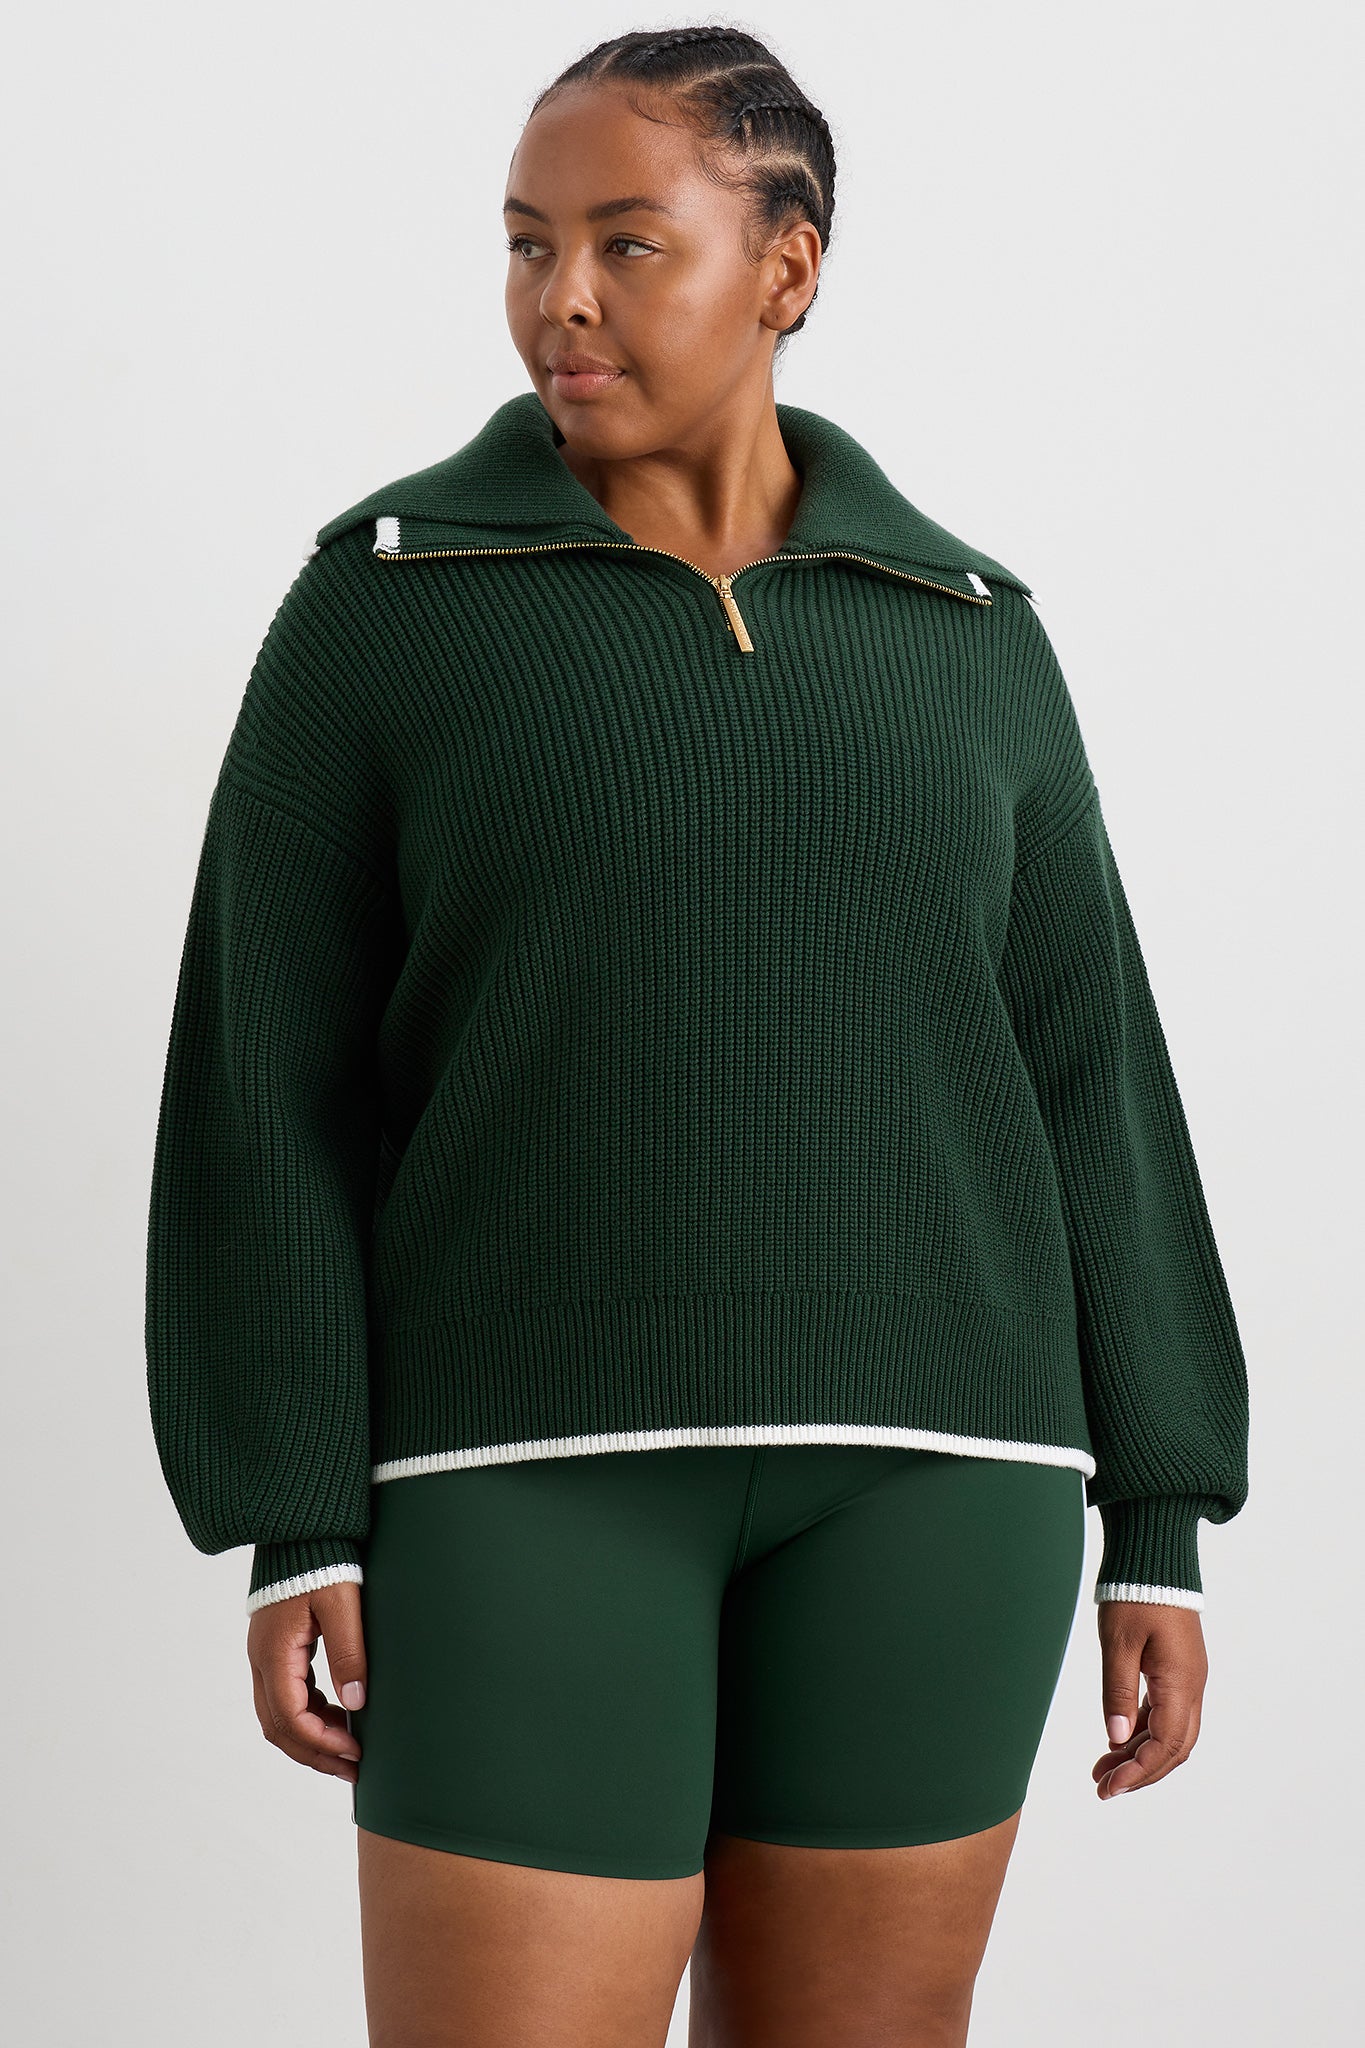 1/4 Zip Ribbed Knit Jumper 431 | Pine Green | AJE ATHLETICA – AJE 